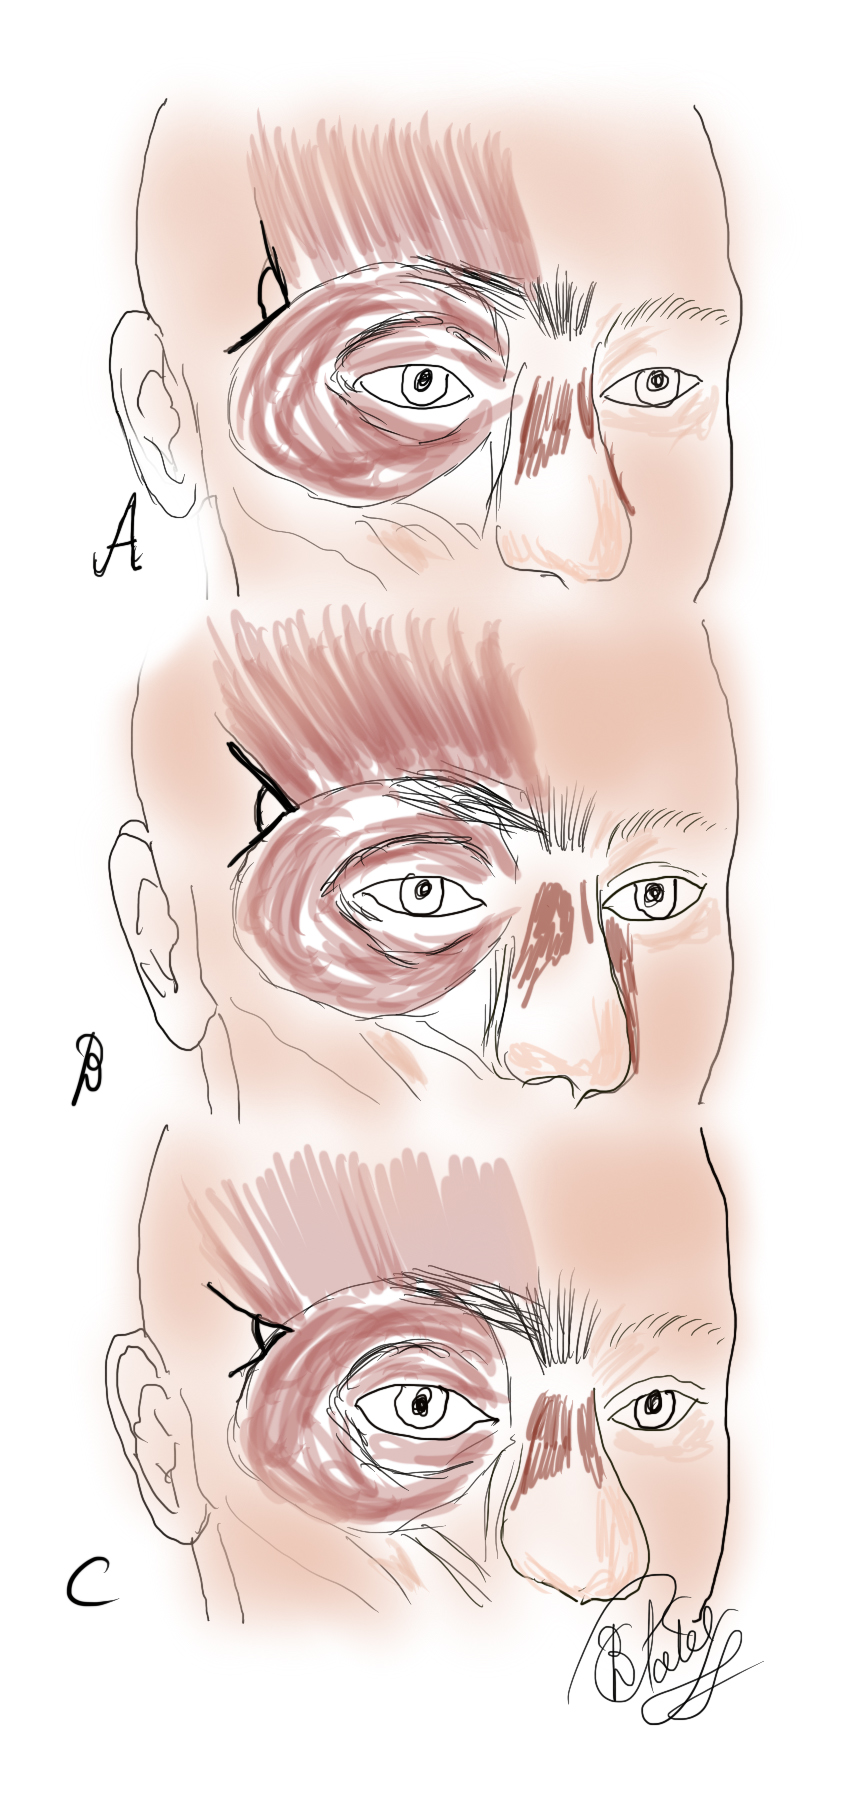 The Frontalis Muscle: The angle of insertion of the frontalis muscle laterally as measured against the orbital orbicularis oculi varies:
A